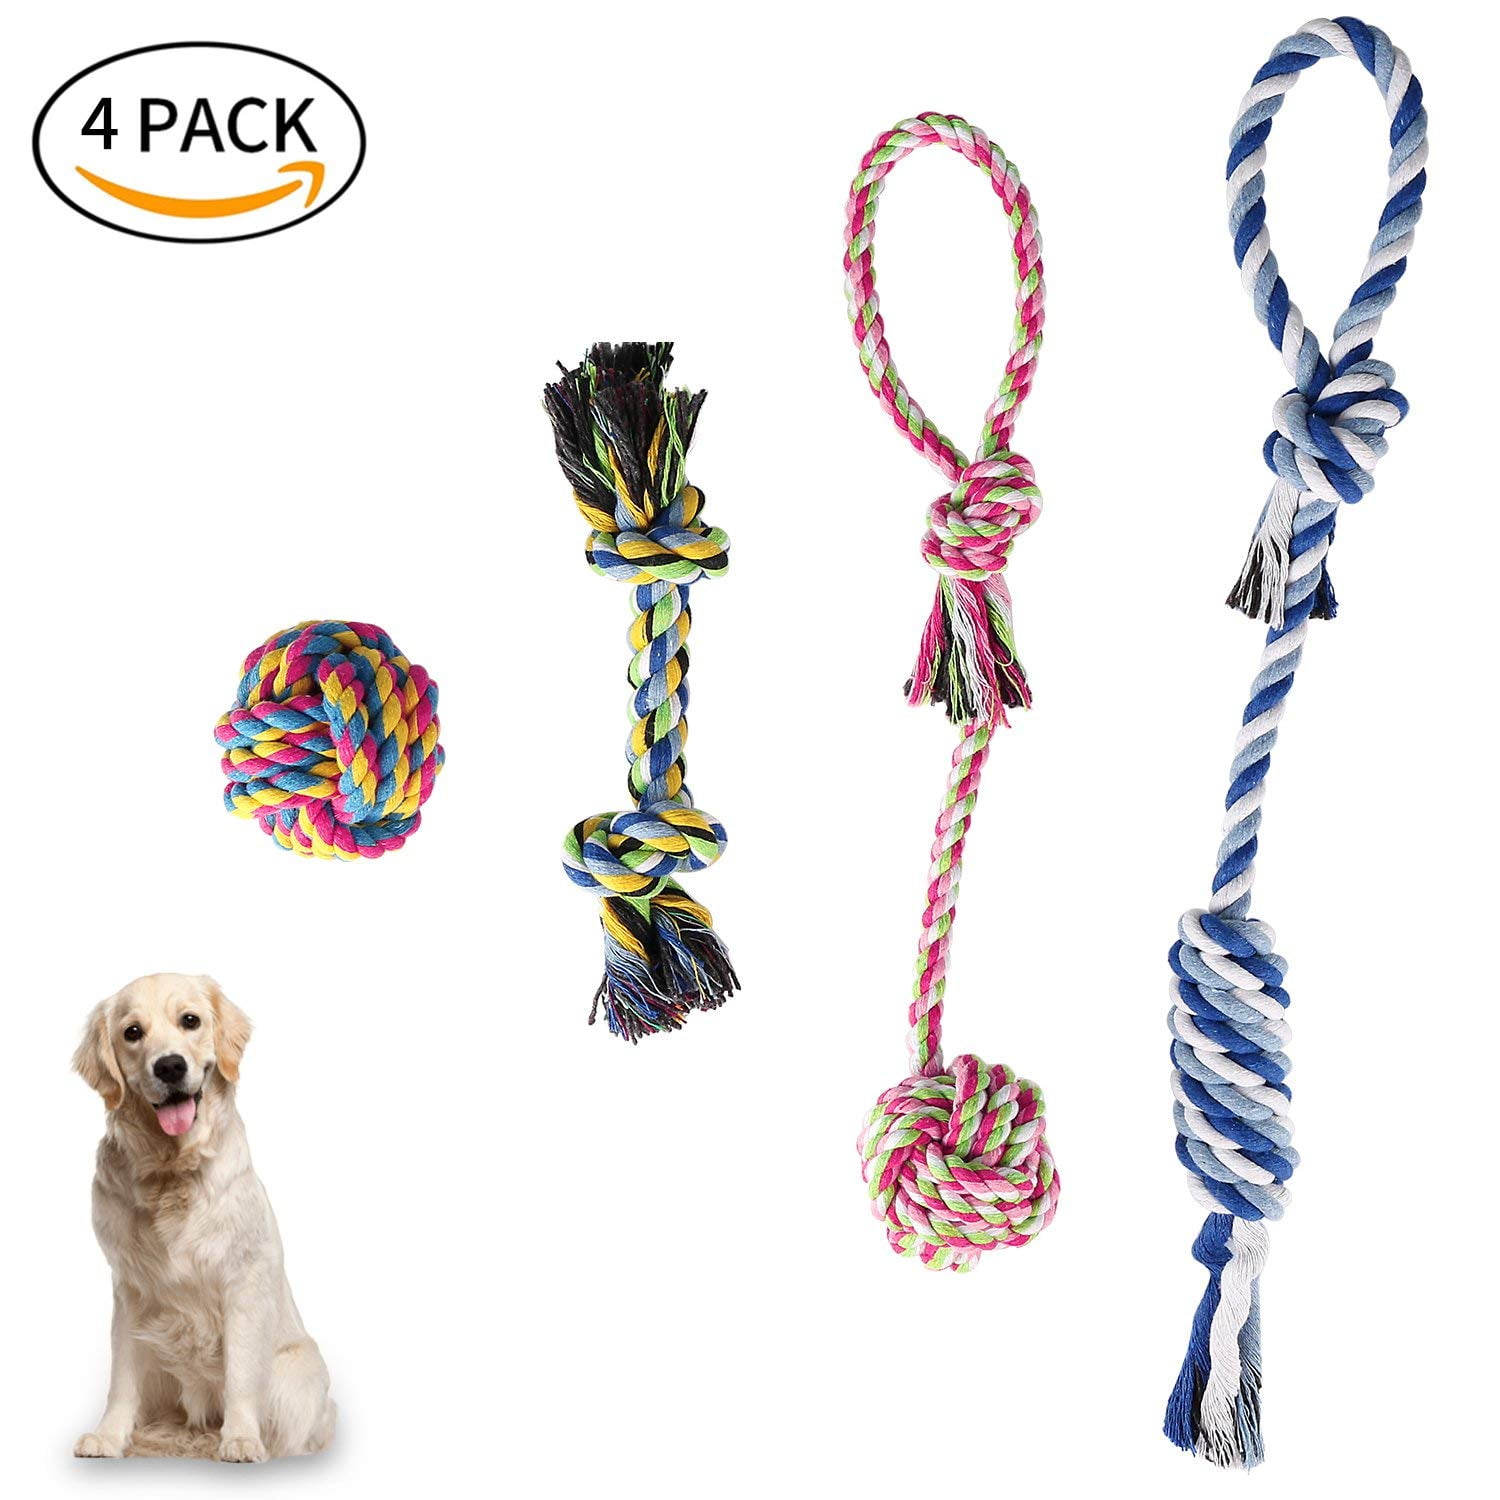 Gold Wrap 100% Cotton Durable Pet Chew Tooth Cleaning Toys Interactive Play Prevents Boredom & Relieves Stress 5 Pack Christmas Dog Rope Toys Set for Small Medium Dogs Puppy Training 